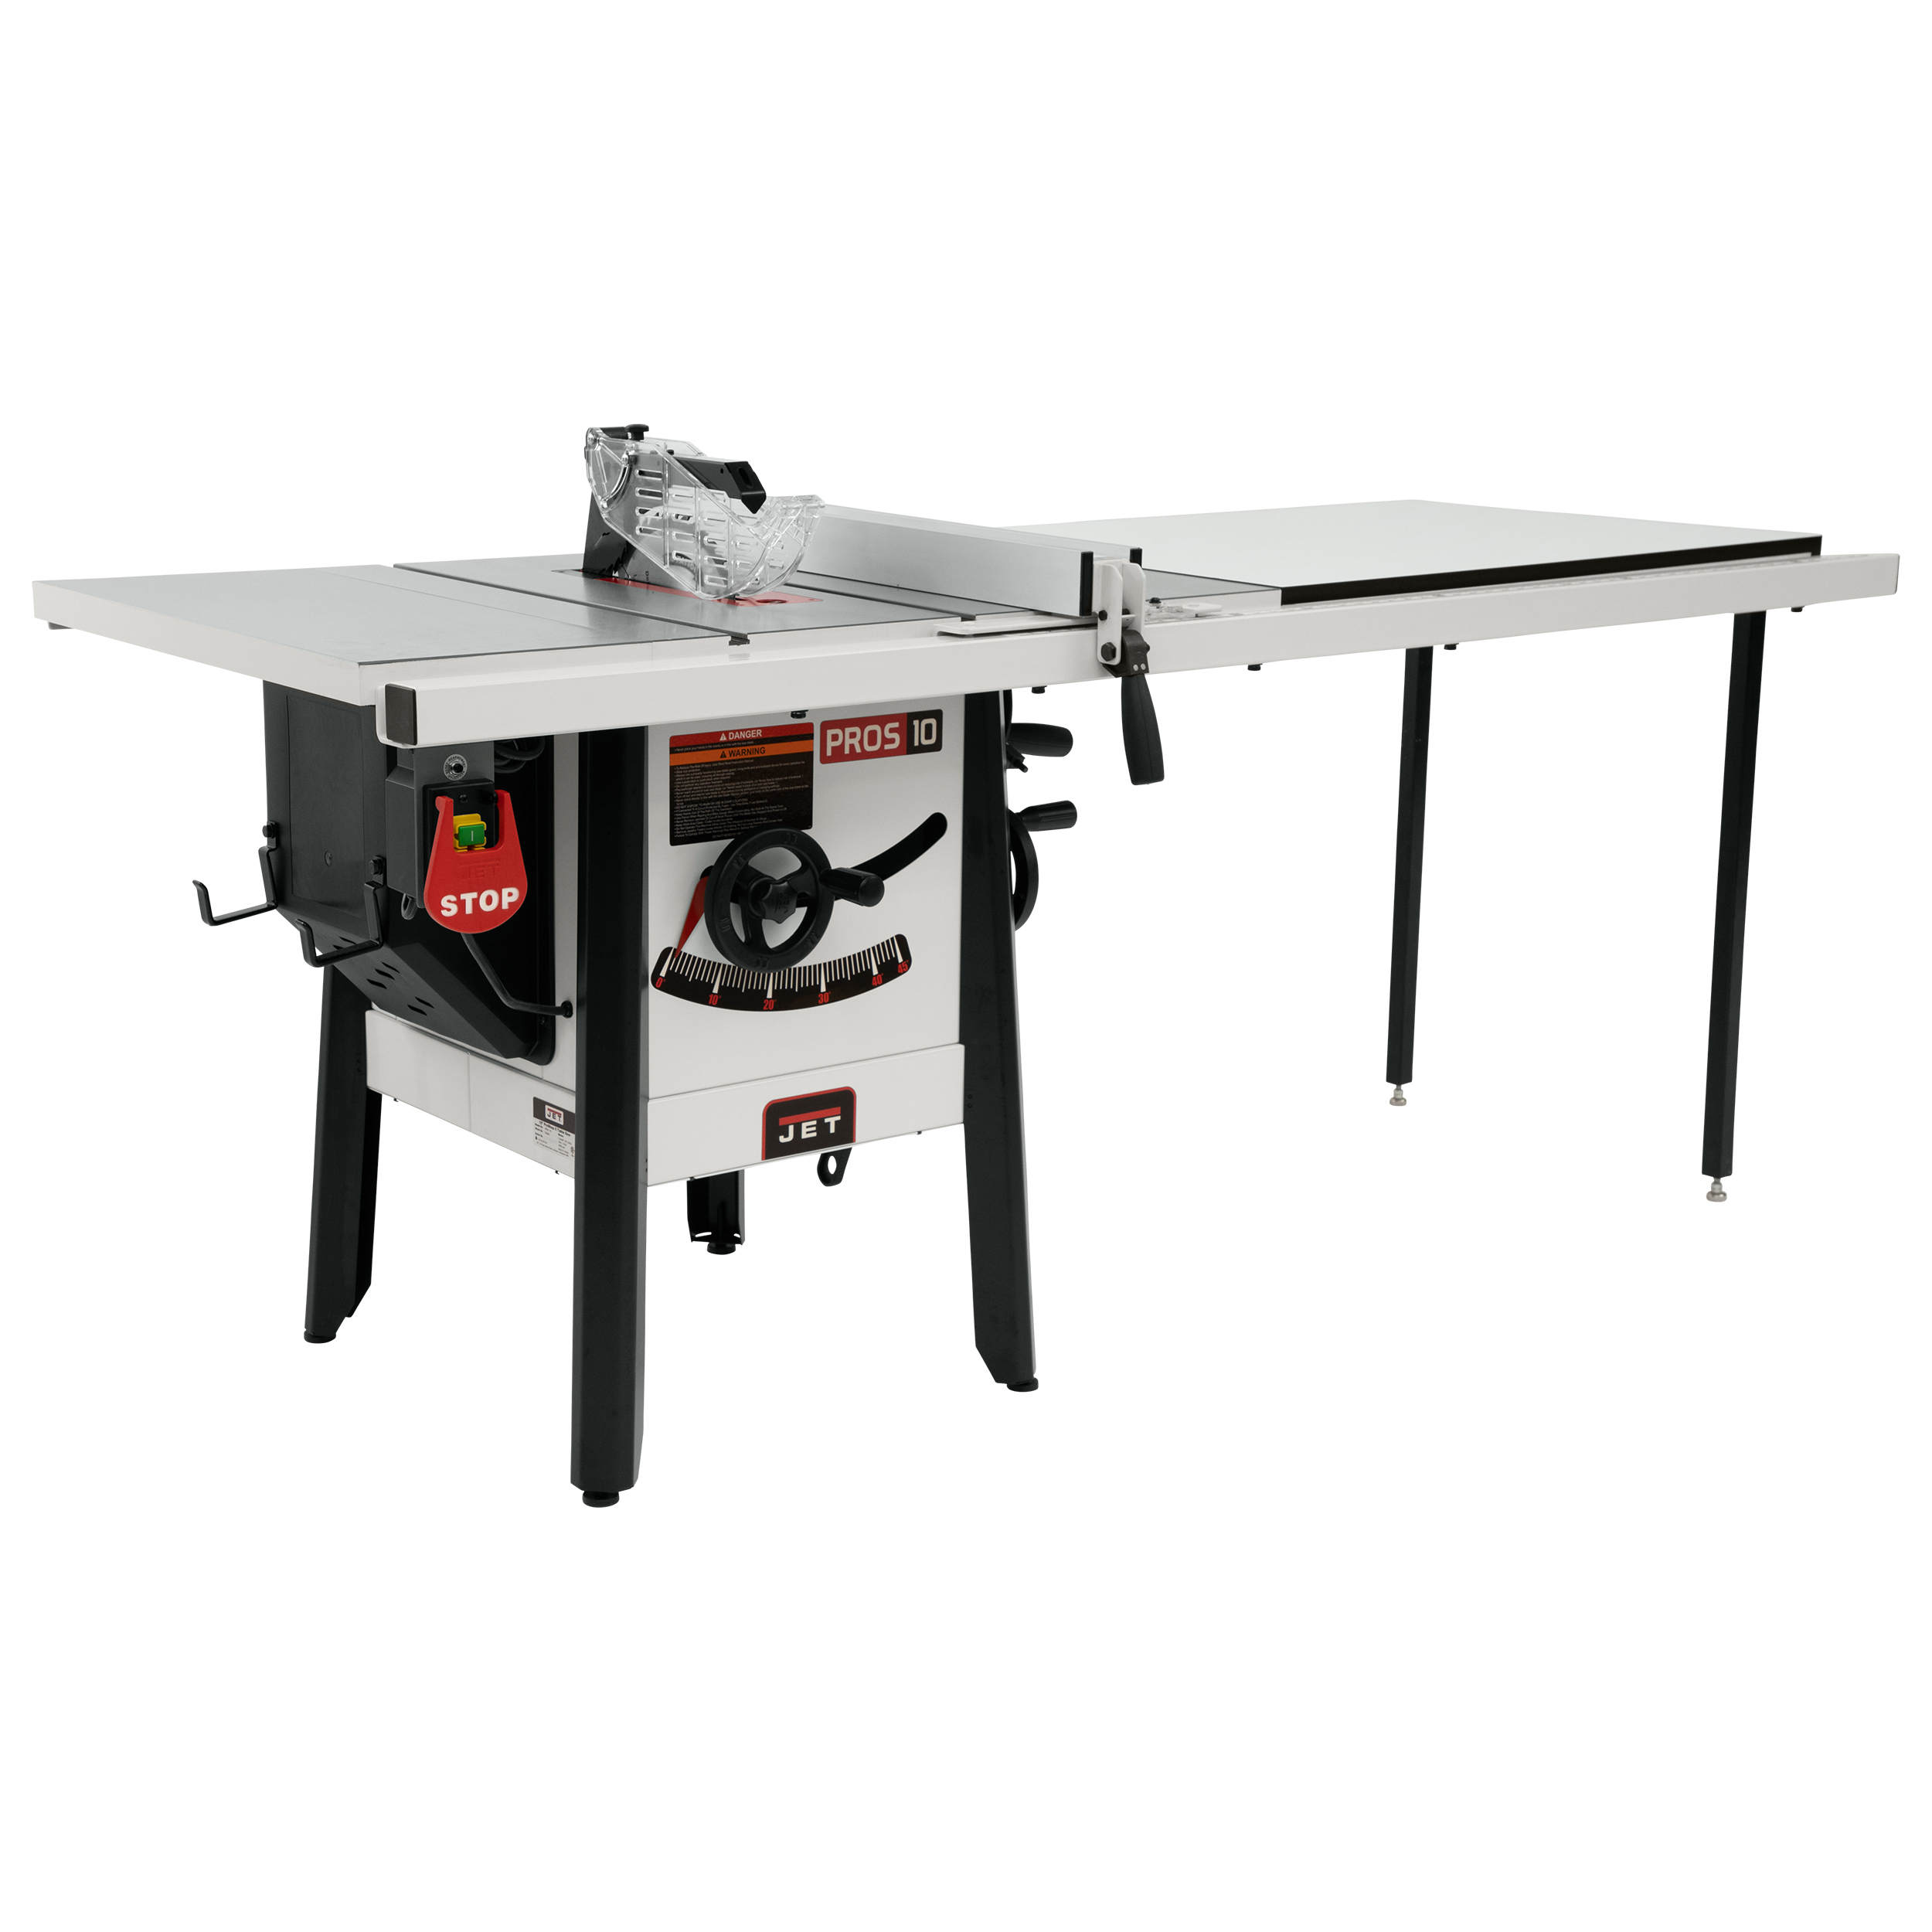 Proshop Ii Table Saw With Cast Wings, 115v, 52" Rip